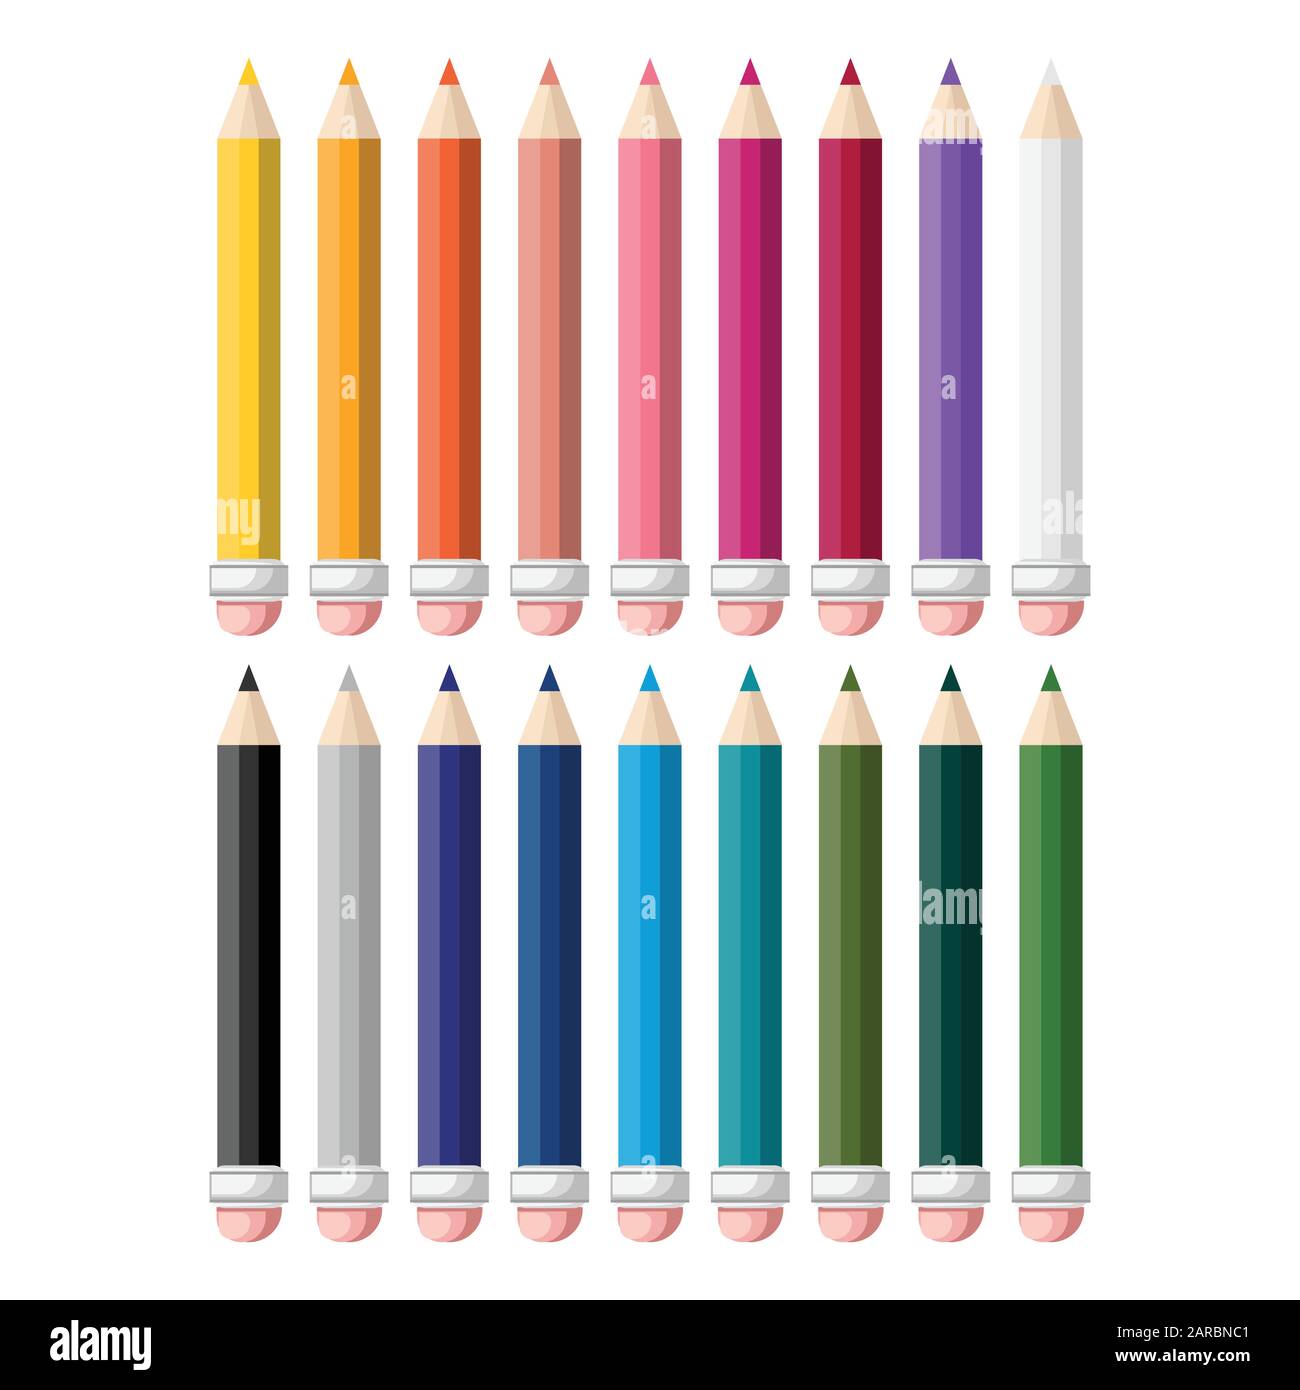 Rainbow Collection Of Pencils For Drawing. Big Collection Of Pensils And  Markers Of Different Colors, White Background. Stock Photo, Picture and  Royalty Free Image. Image 92919060.